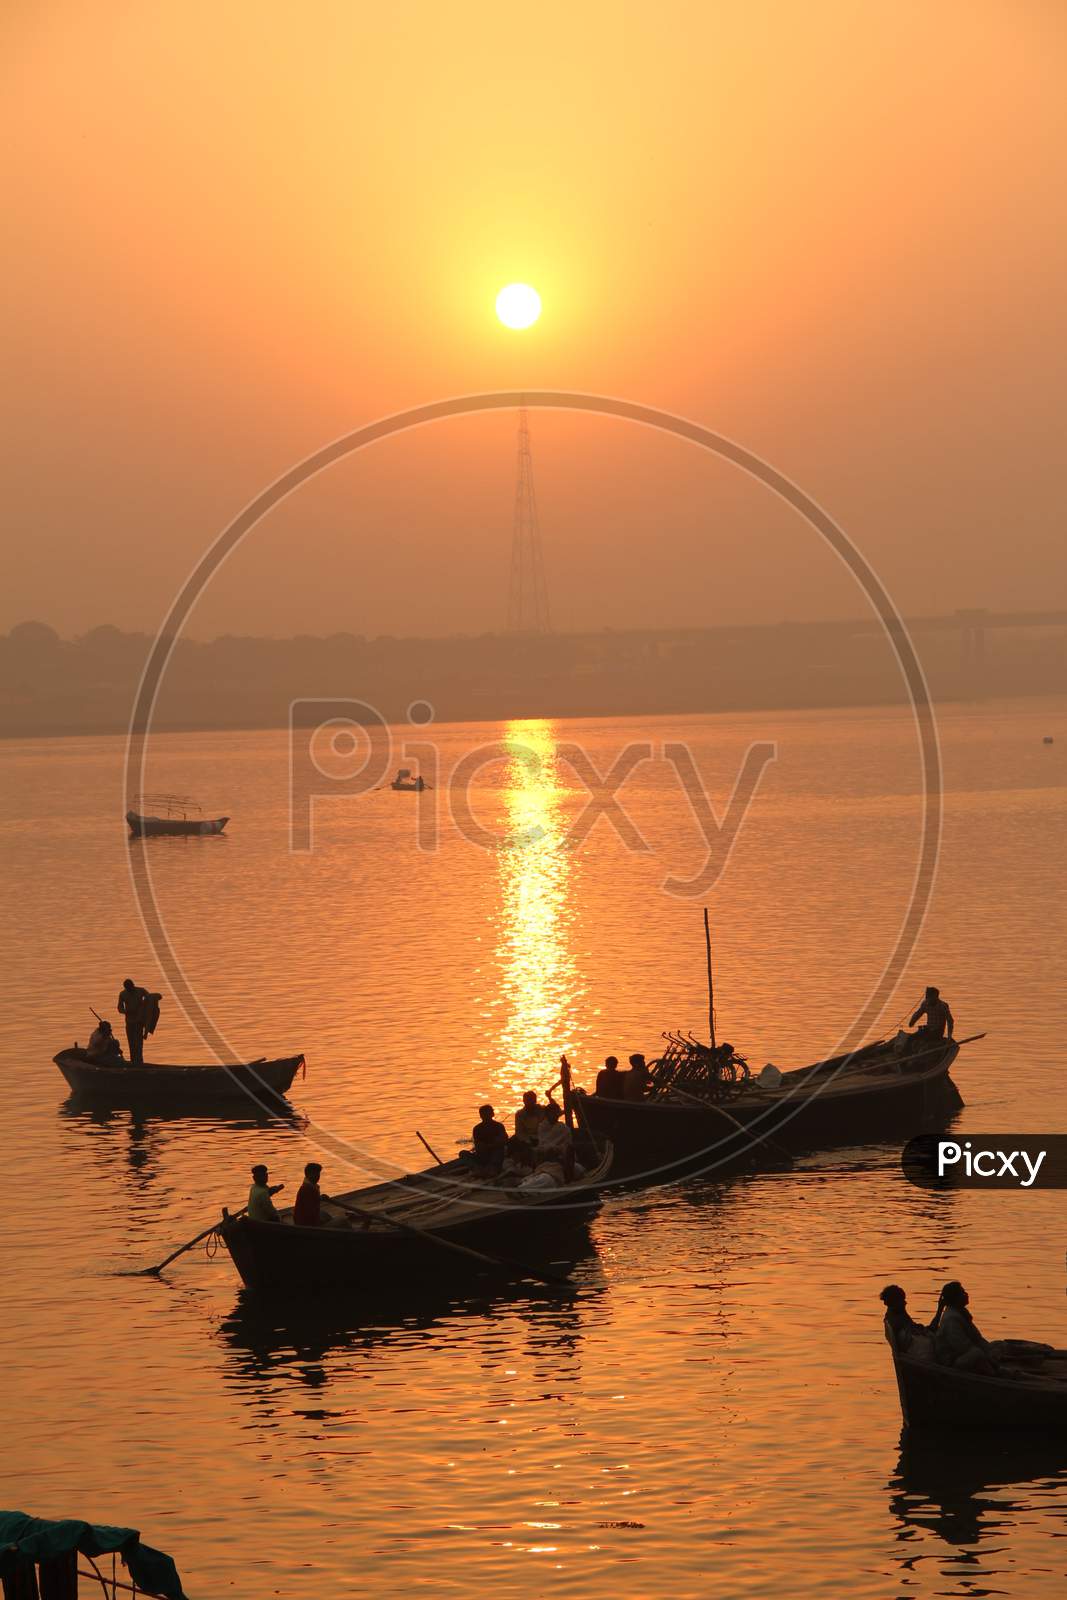 Silhouette of  Boats In  Sangam, the confluence of the Ganges, Yamuna and Saraswati rivers, Prayagraj, previously known as Allahabad, India.